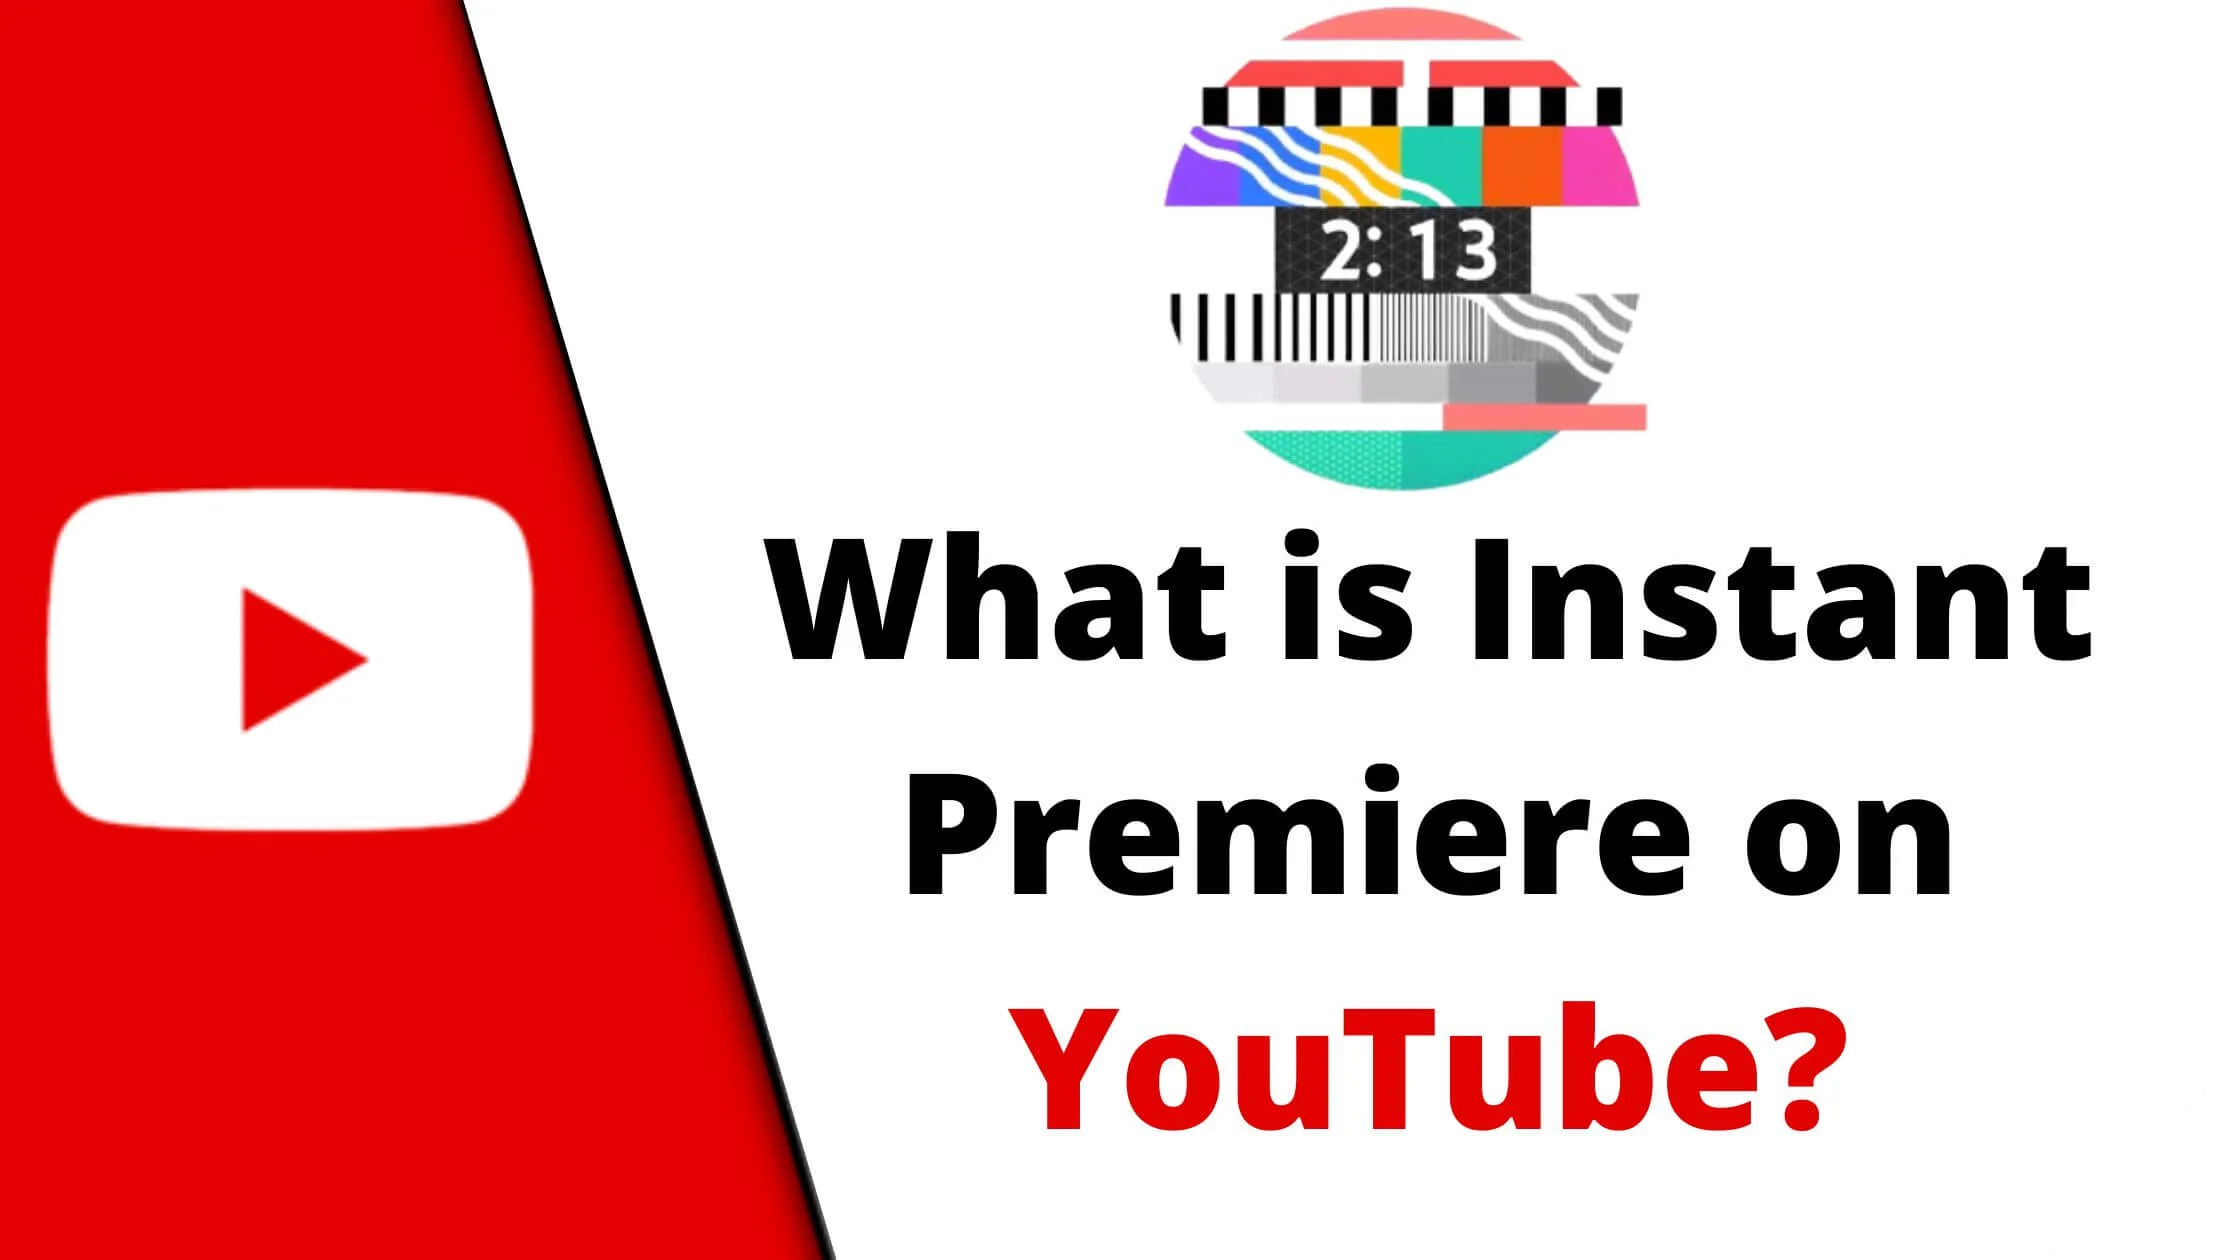 What is Instant Premiere on YouTube